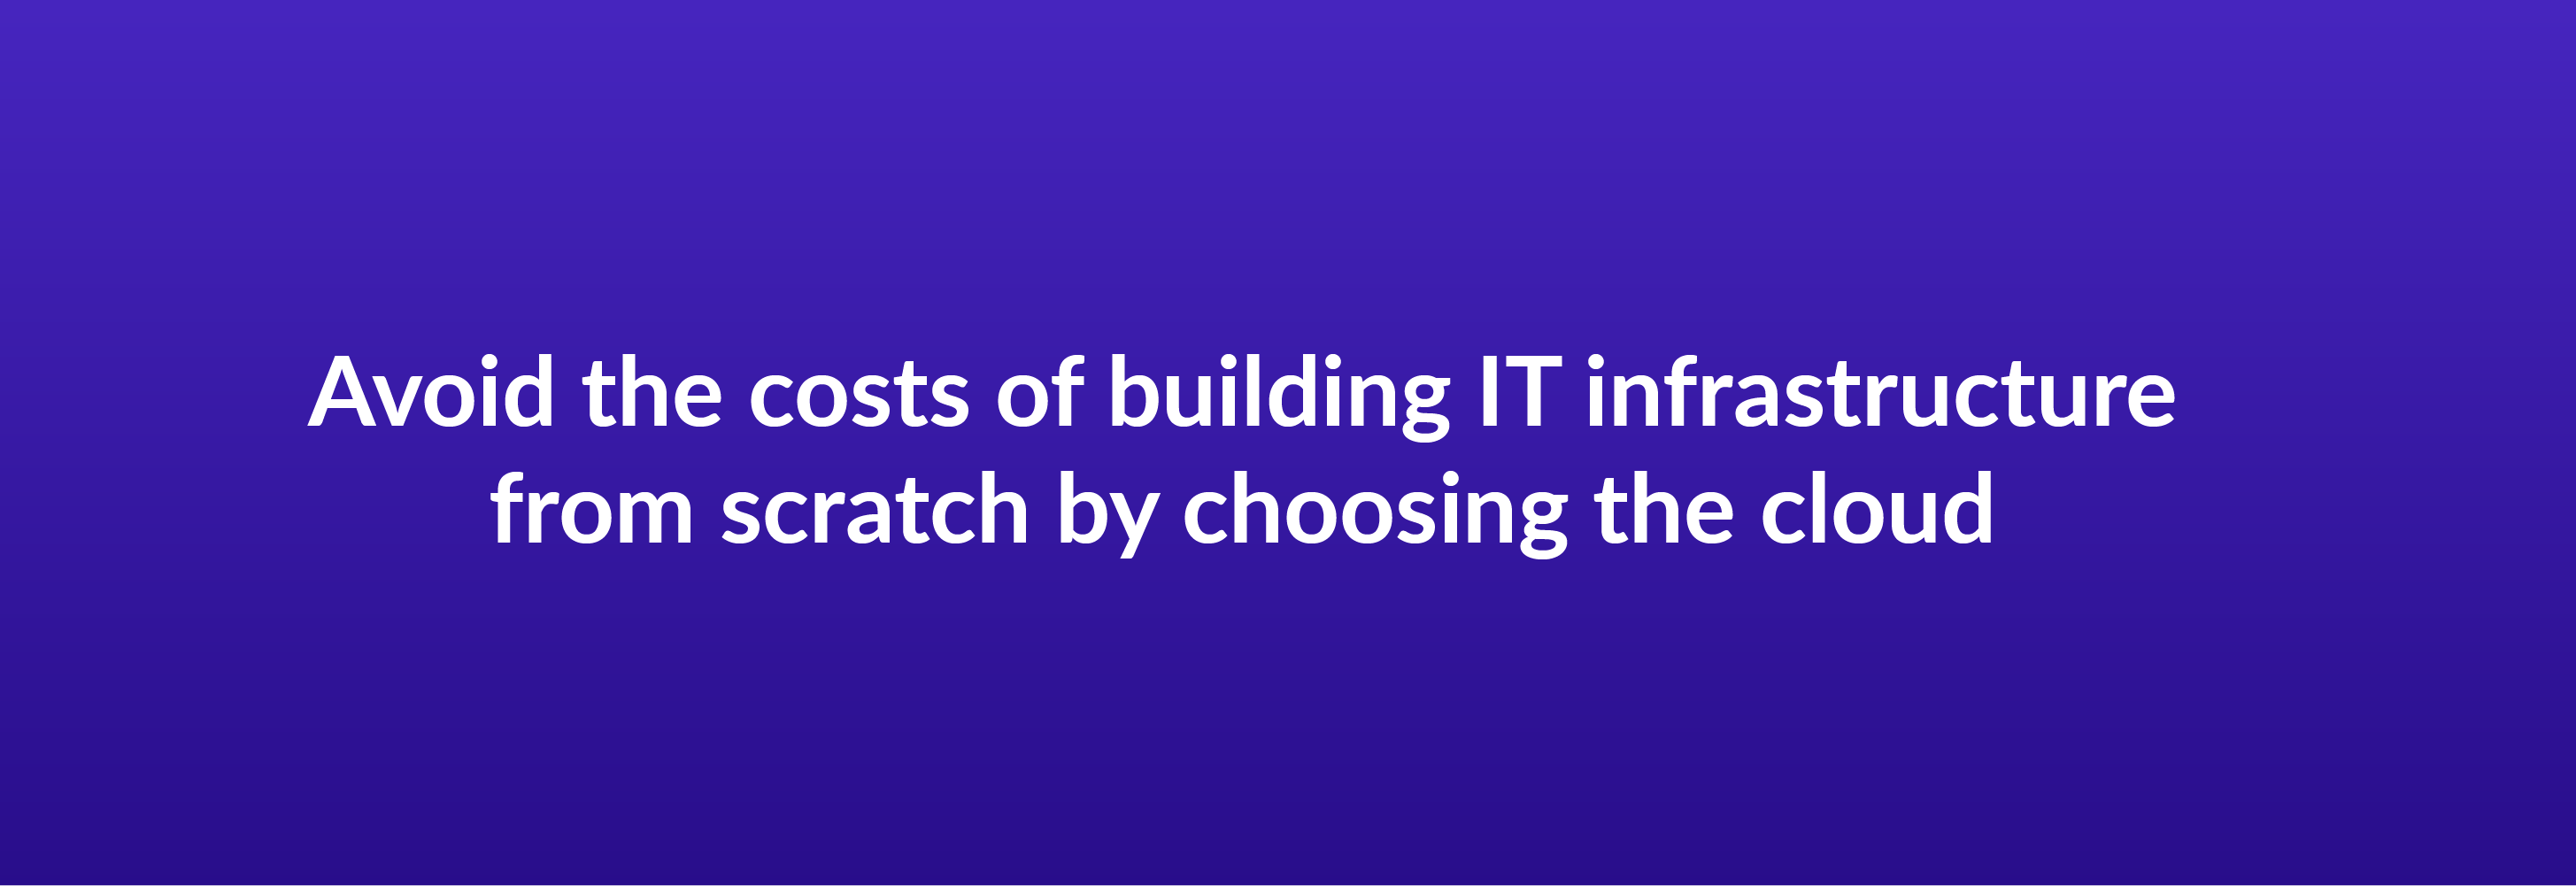 Avoid the costs of building IT infrastructure from scratch by choosing the cloud